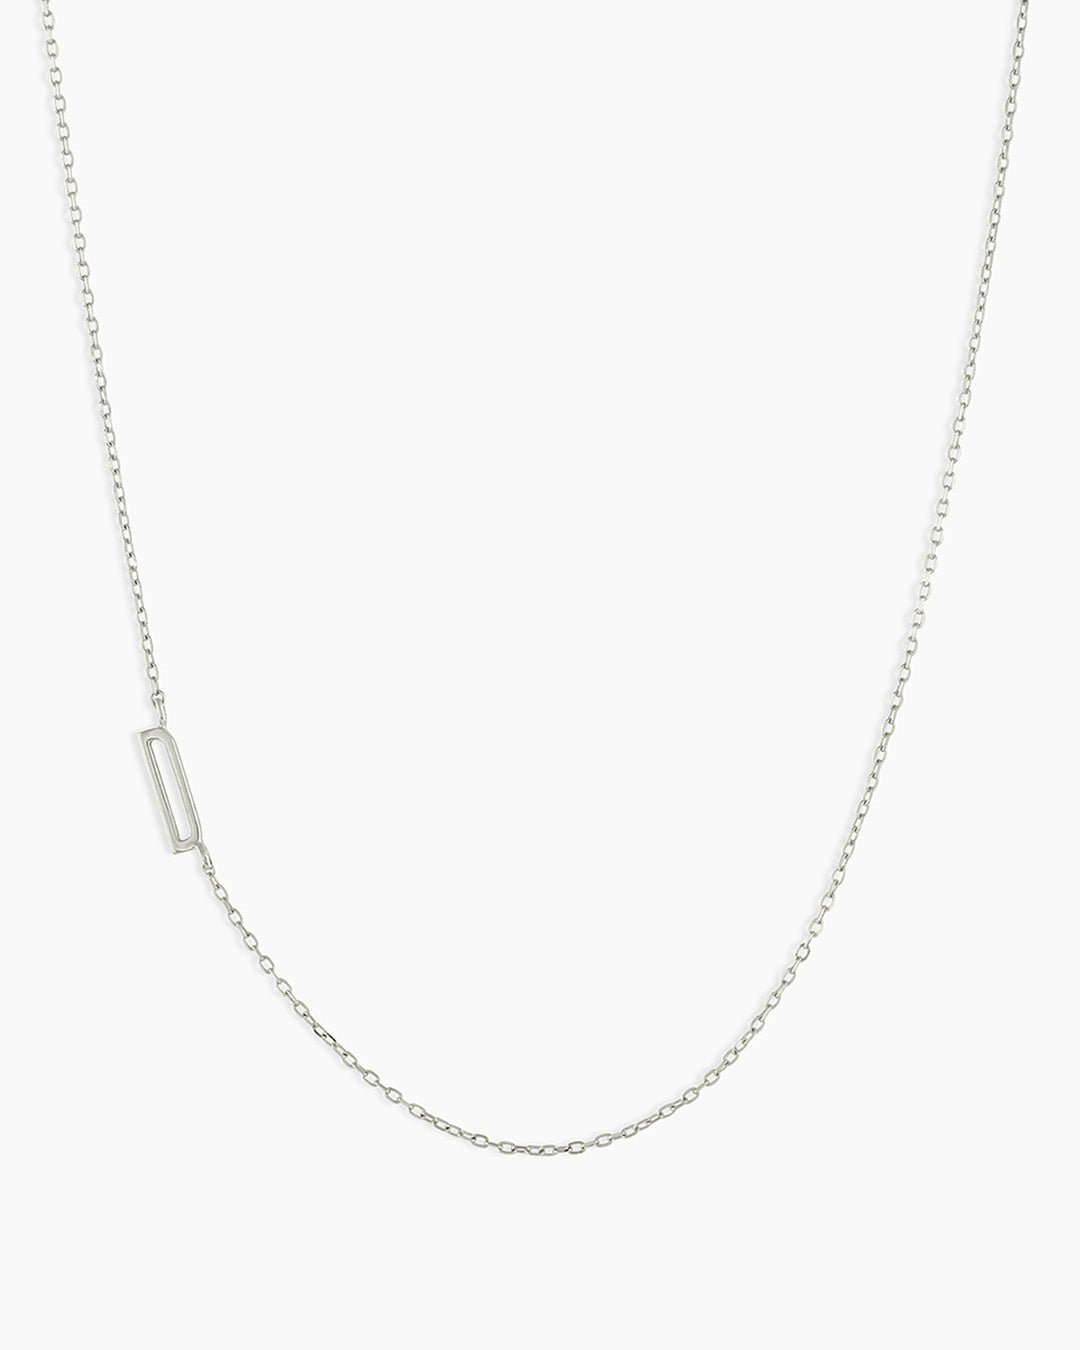 Woman wearing Alphabet Necklace || option::14k Solid White Gold, D